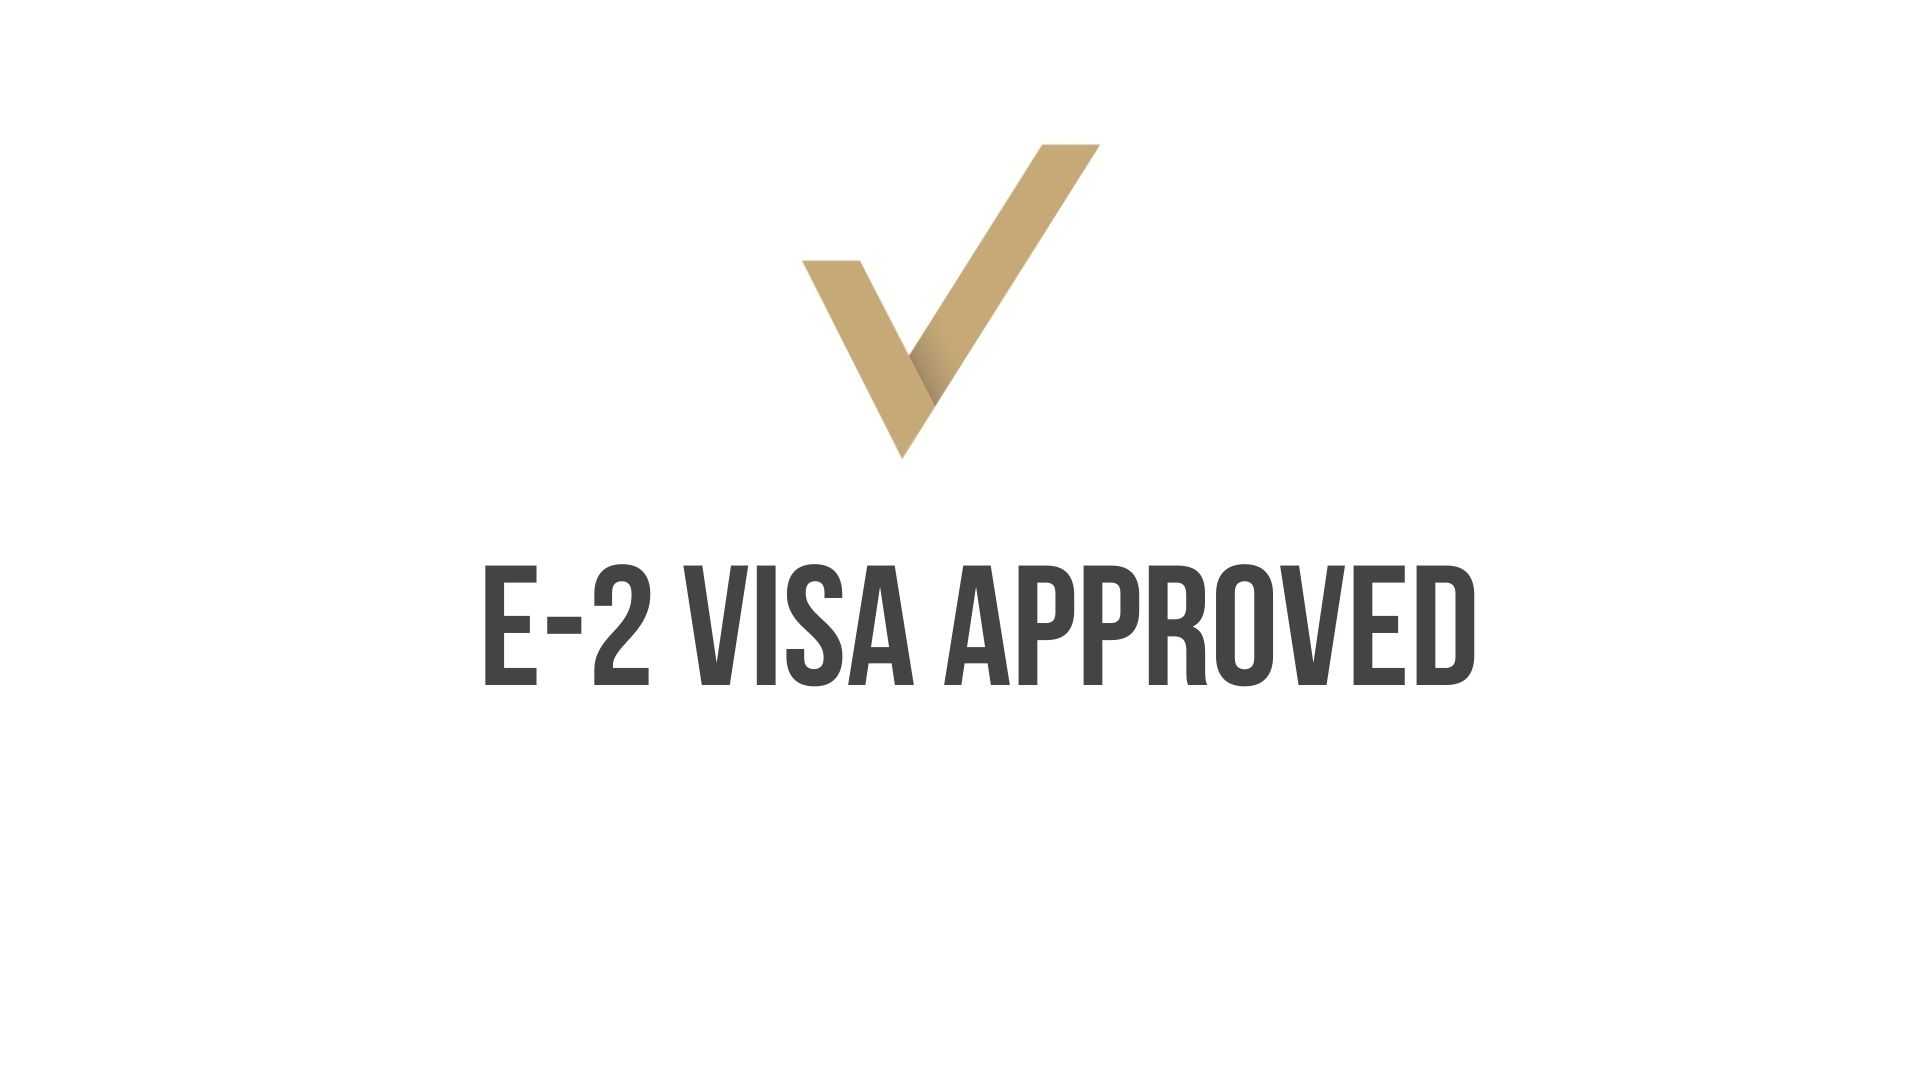 E-2 Visa Approval for Construction Consultant at US Embassy in Paris